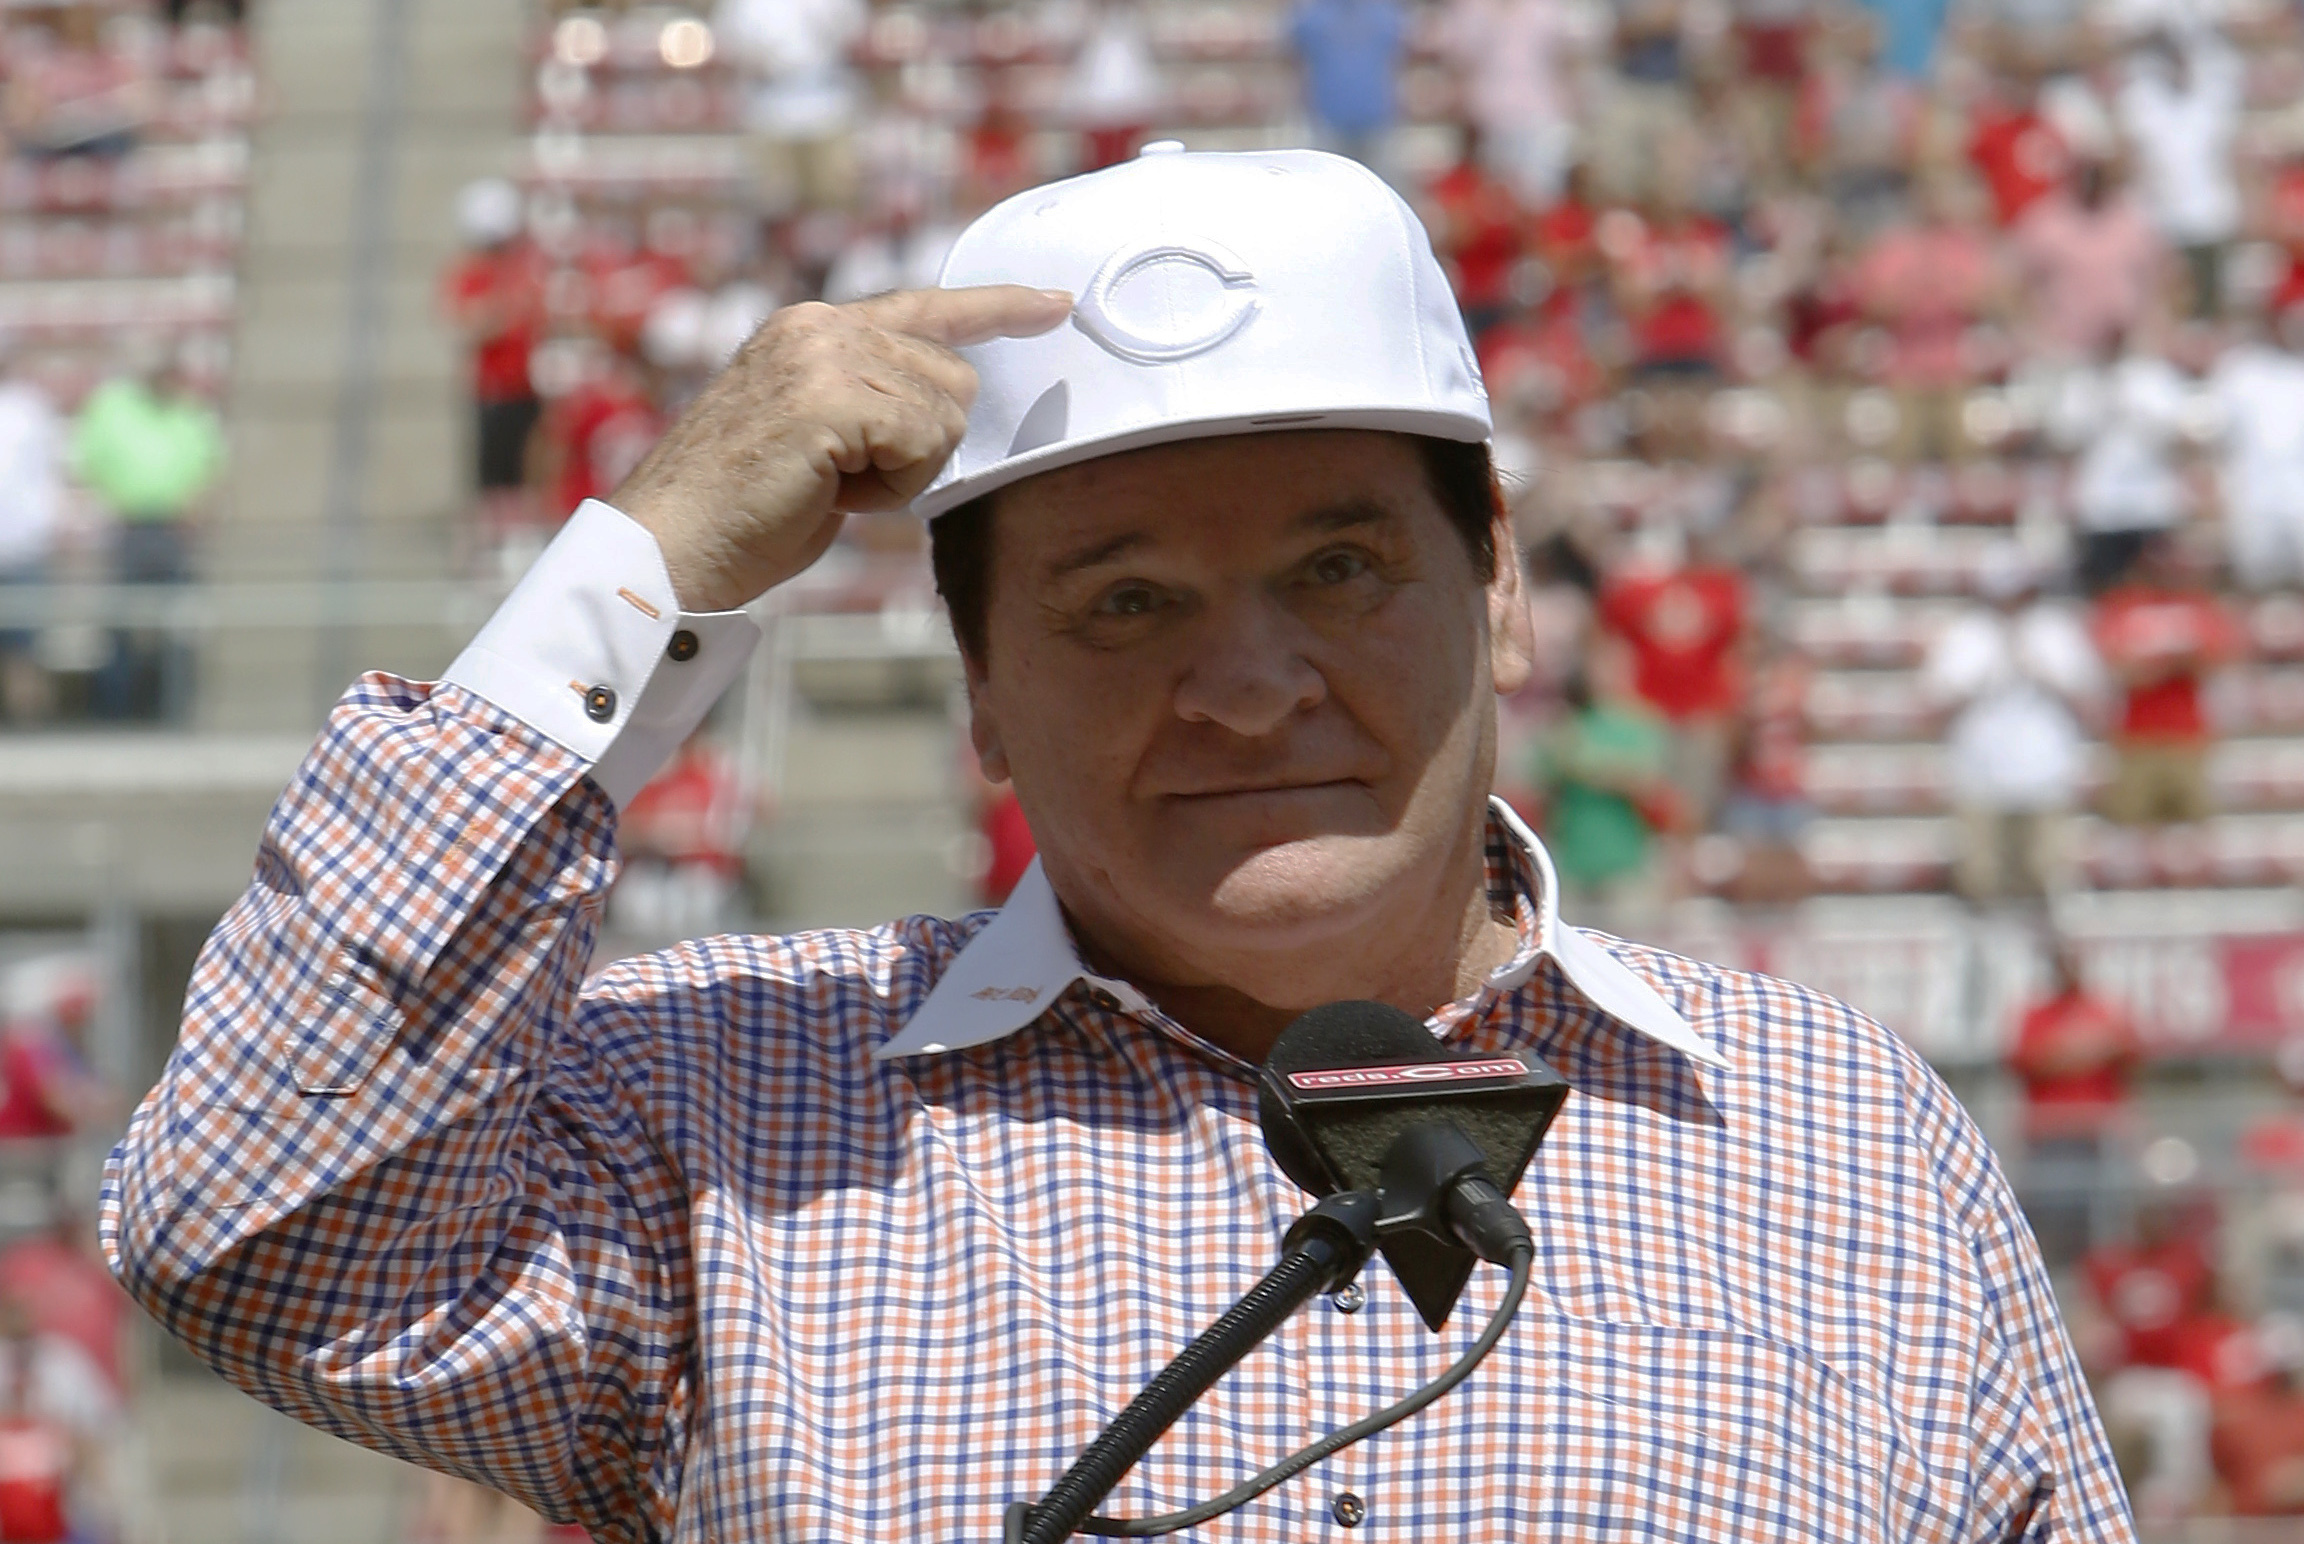 Pete Rose tries again for Hall of Fame with Rob Manfred letter